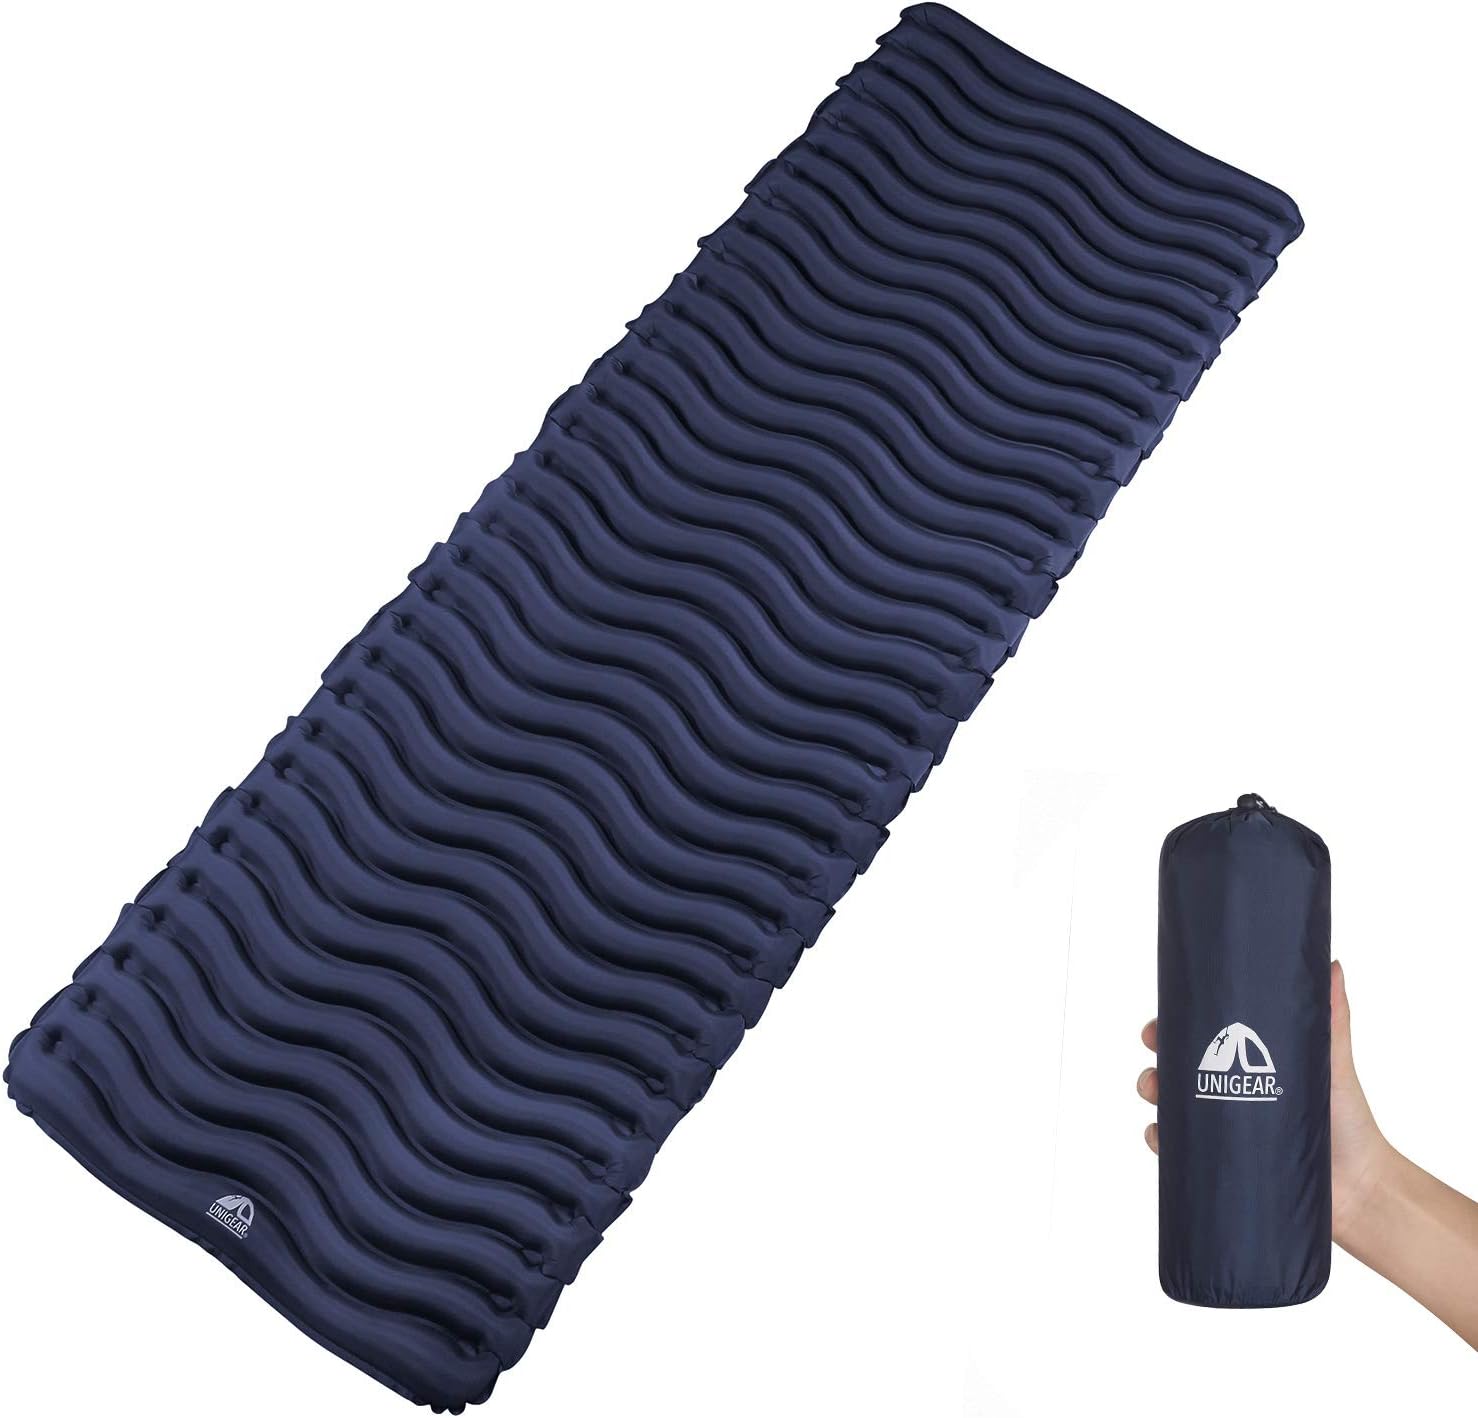 Unigear Ultralight Inflatable Sleeping Pad, Compact Air Camping Mat,Lightweight Camping Mattress for Backpacking, Hiking and Traveling